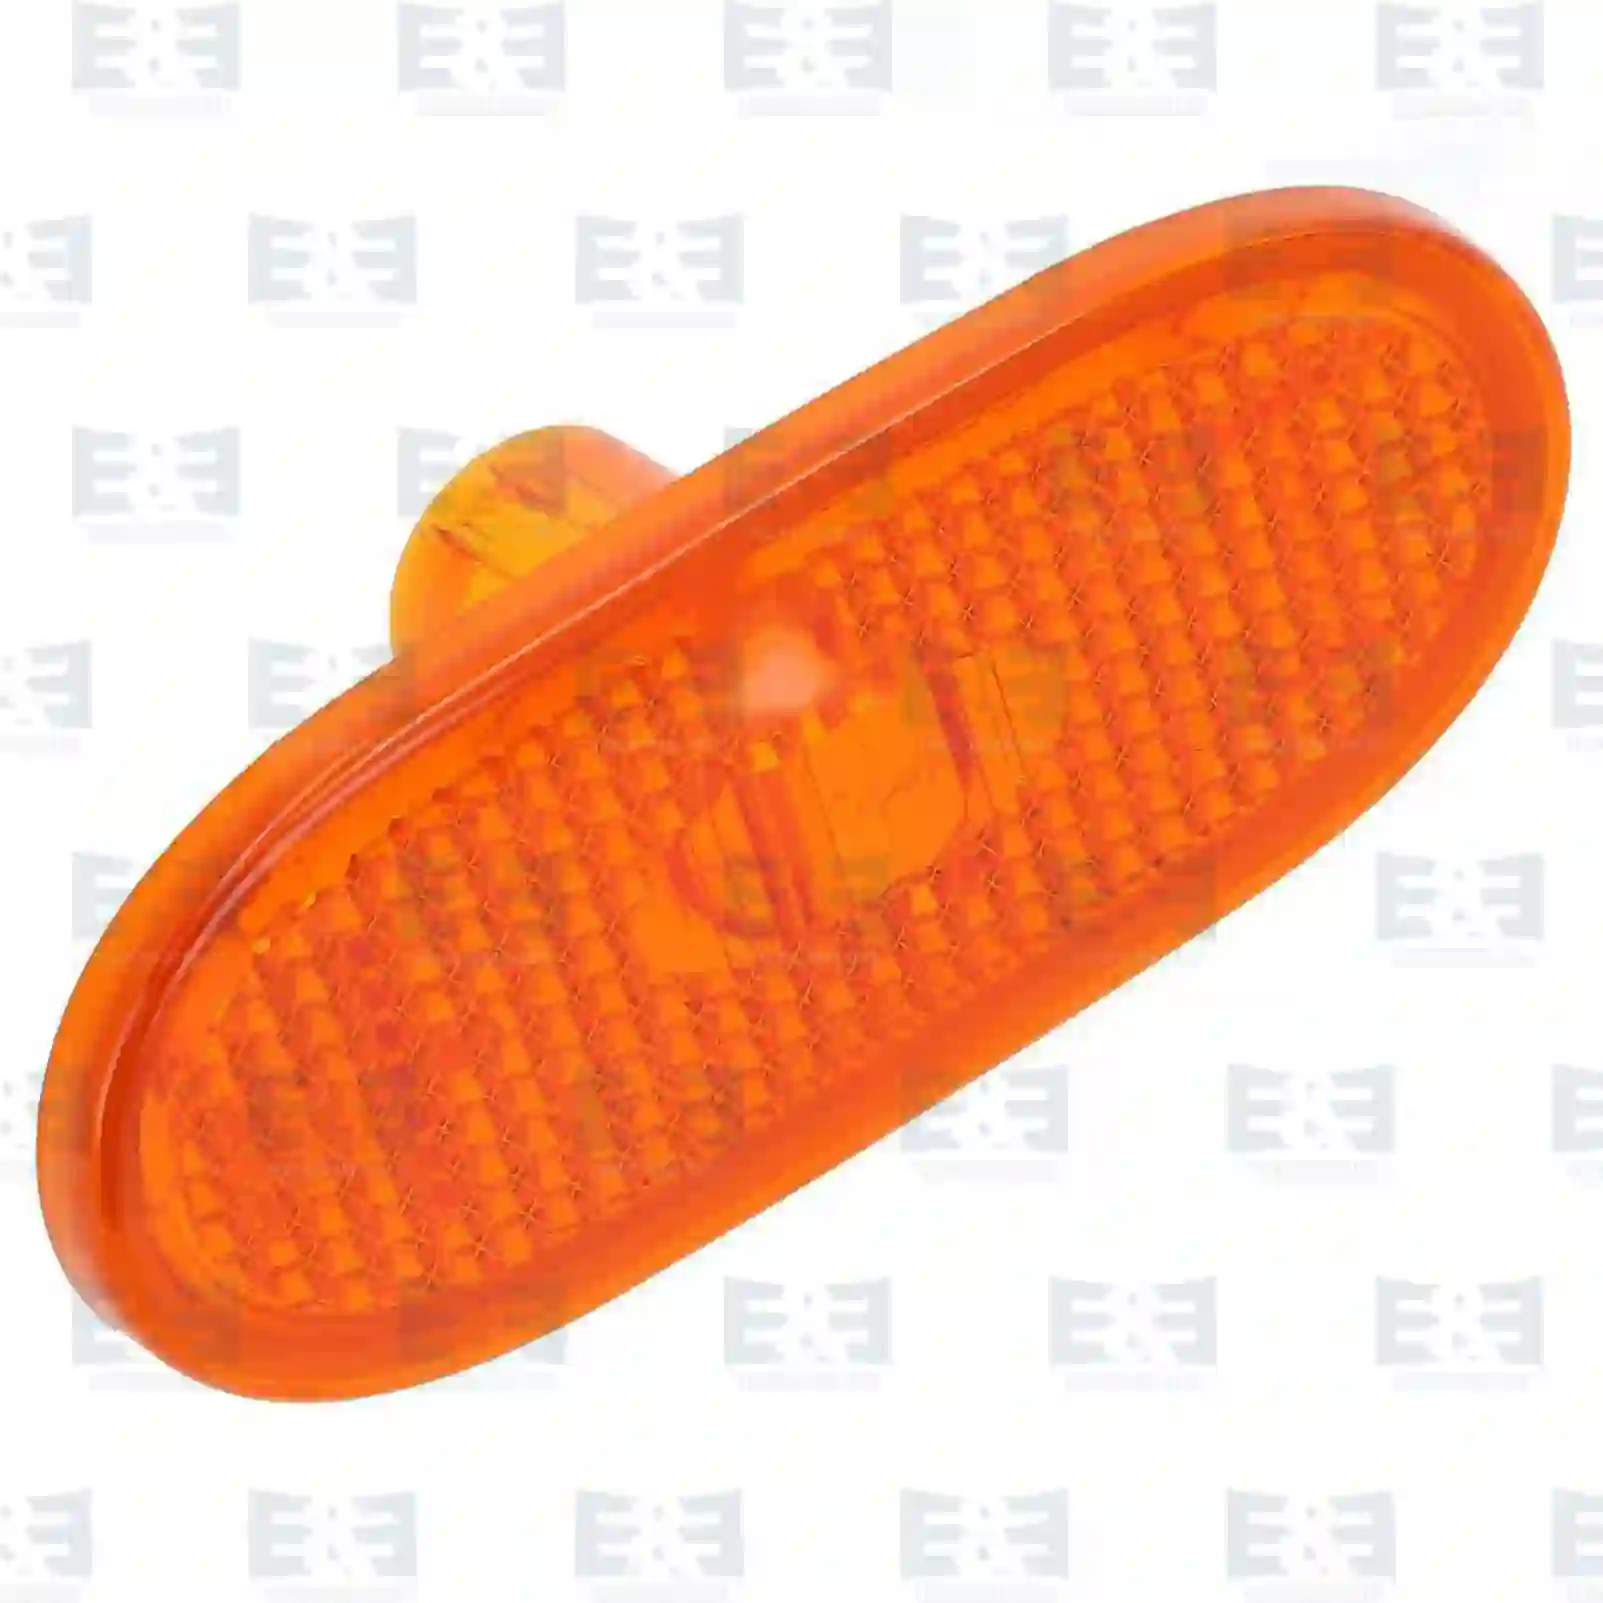  Side marking lamp || E&E Truck Spare Parts | Truck Spare Parts, Auotomotive Spare Parts